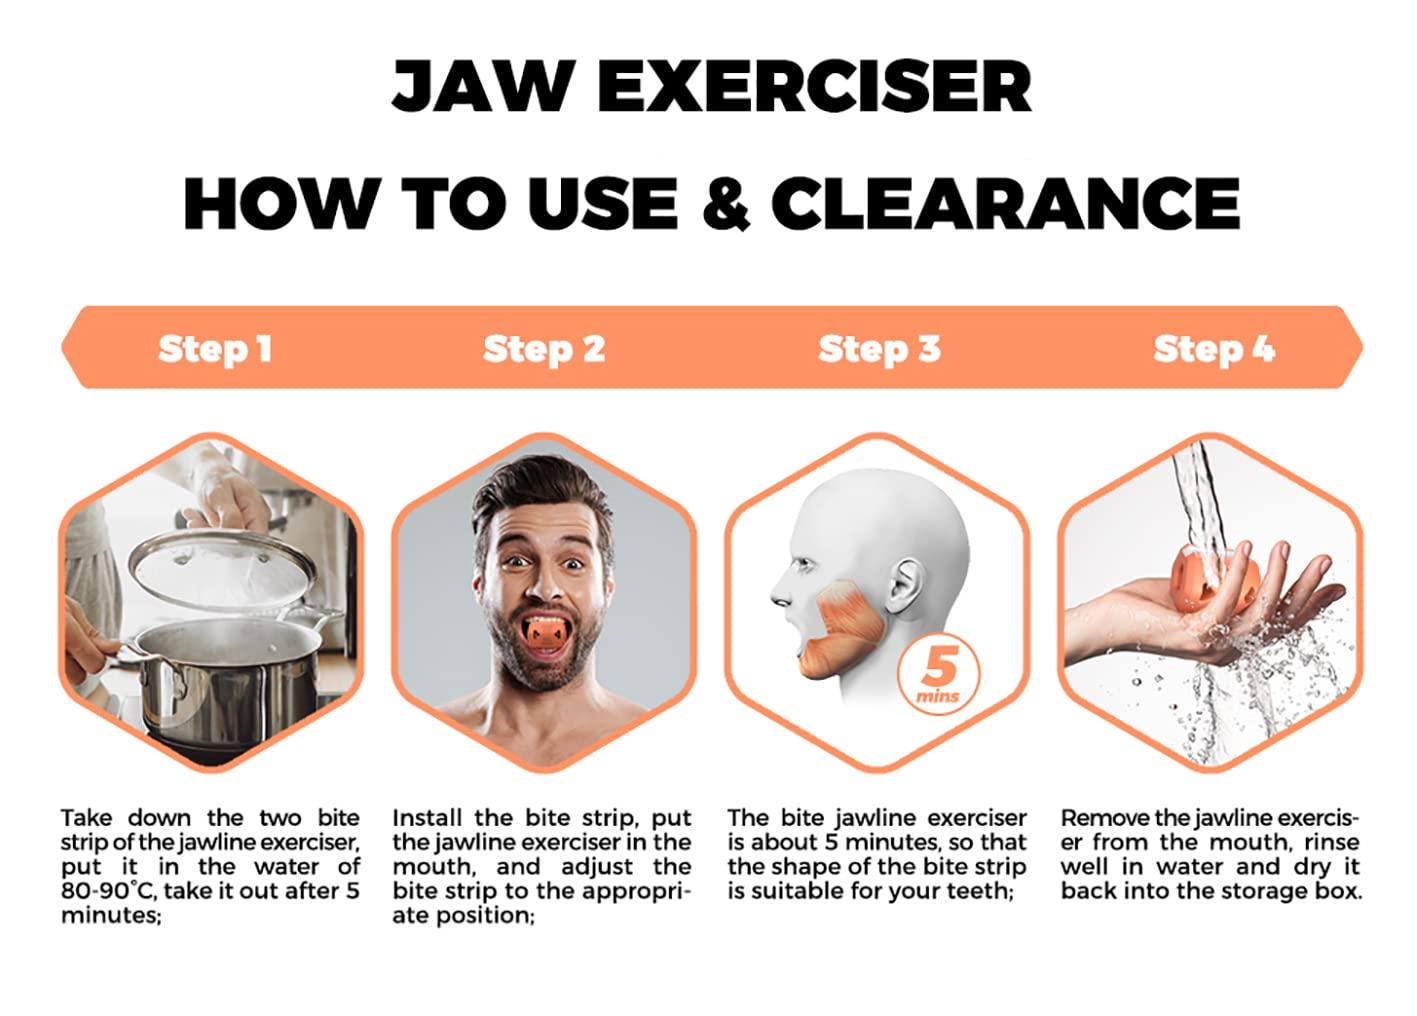 Best Jaw Exerciser: Your Guide Through Jawline Workout Tools